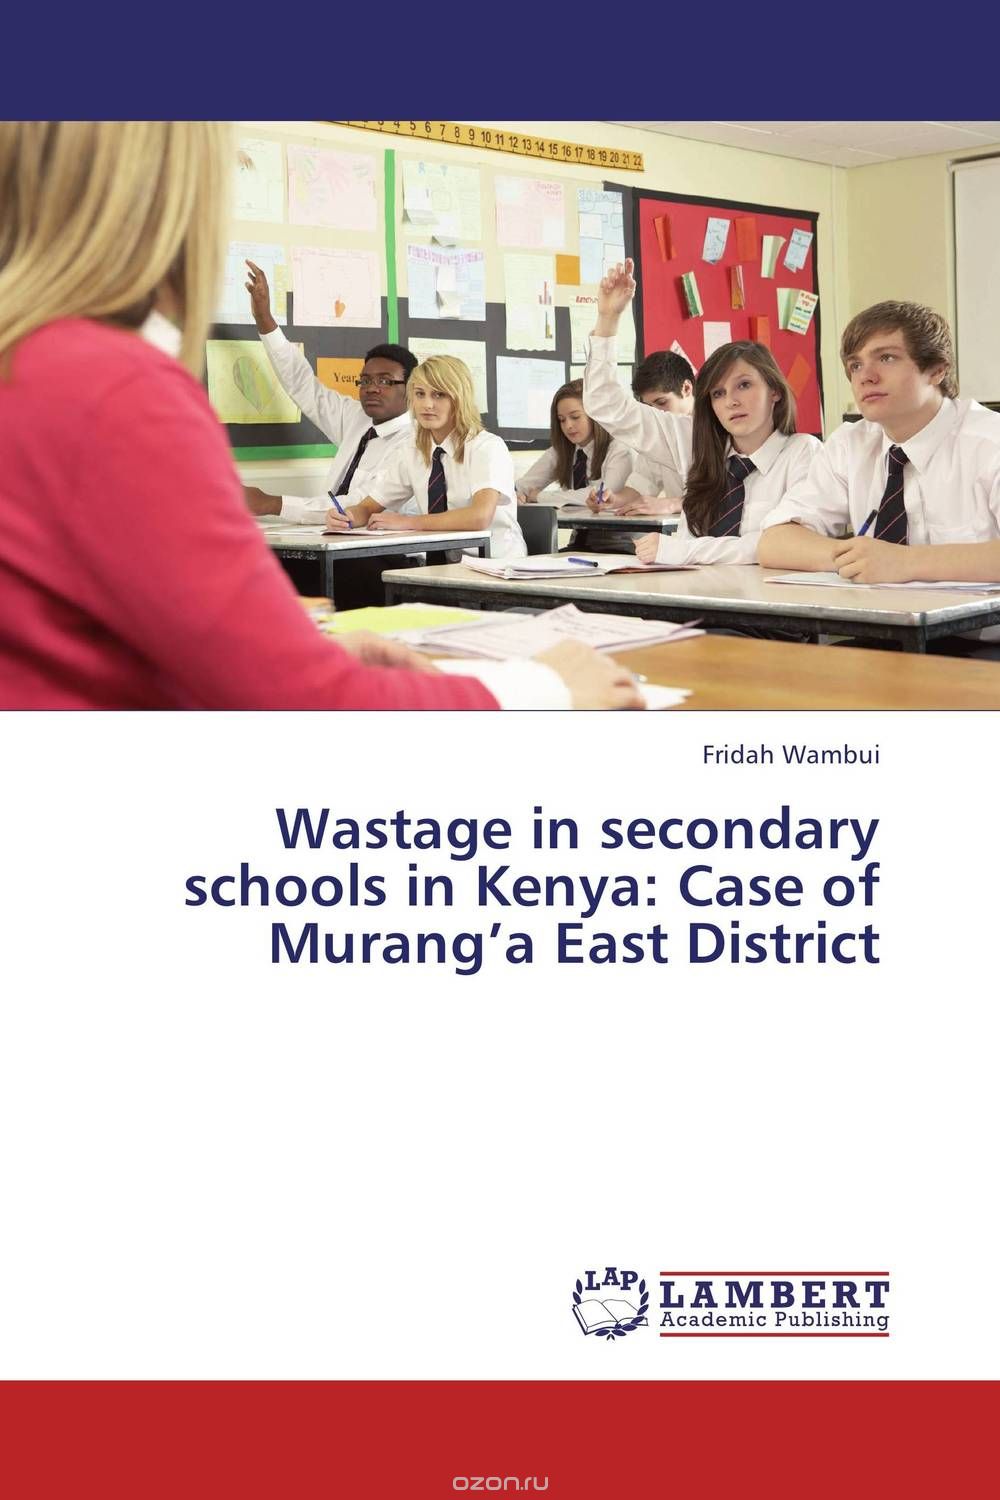 Скачать книгу "Wastage in secondary schools in Kenya: Case of Murang’a East District"